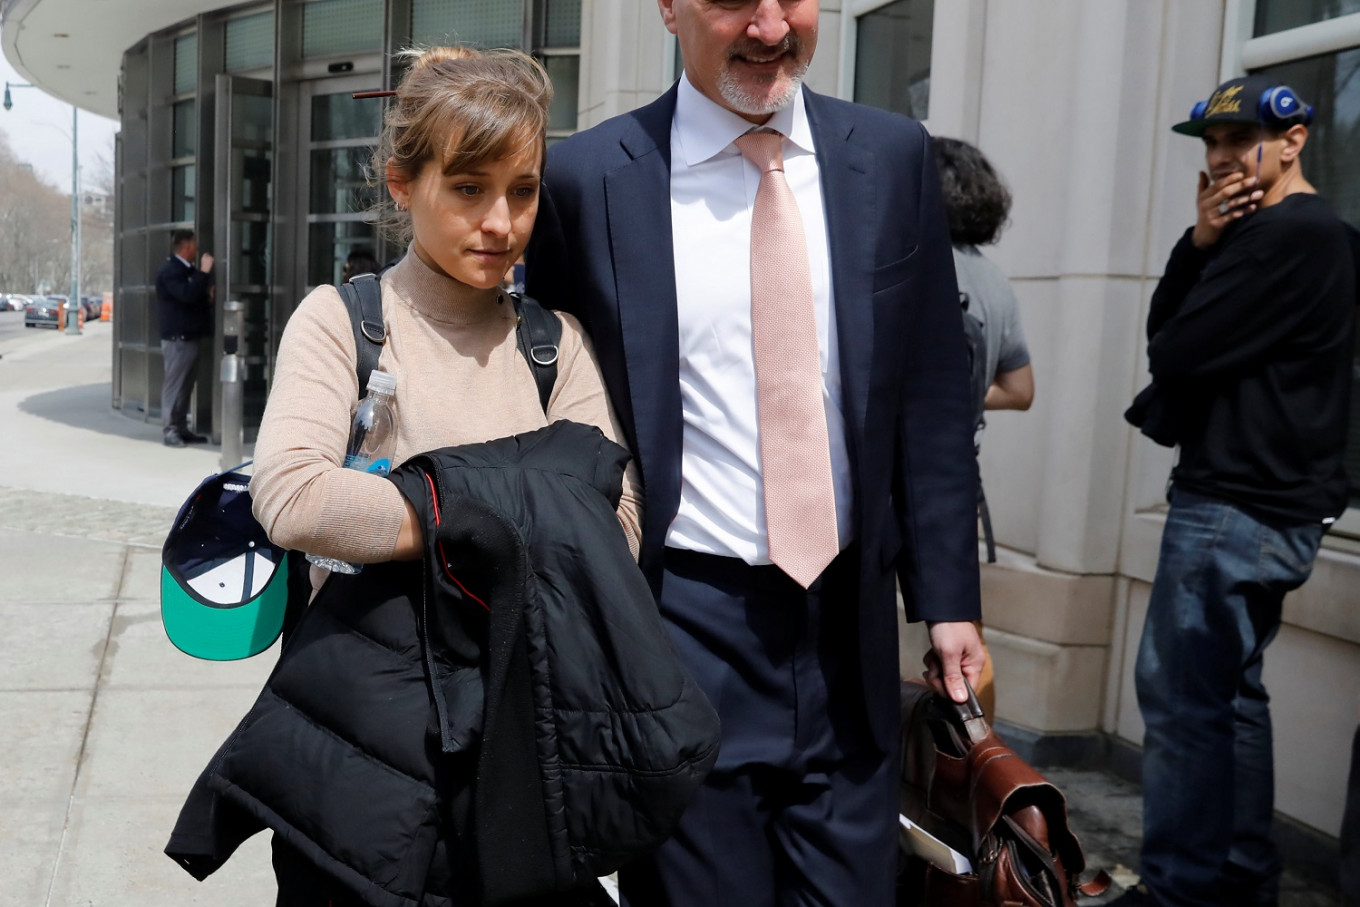 Smallville Actress Allison Mack Pleads Guilty In Sex Cult Case Entertainment The Jakarta Post